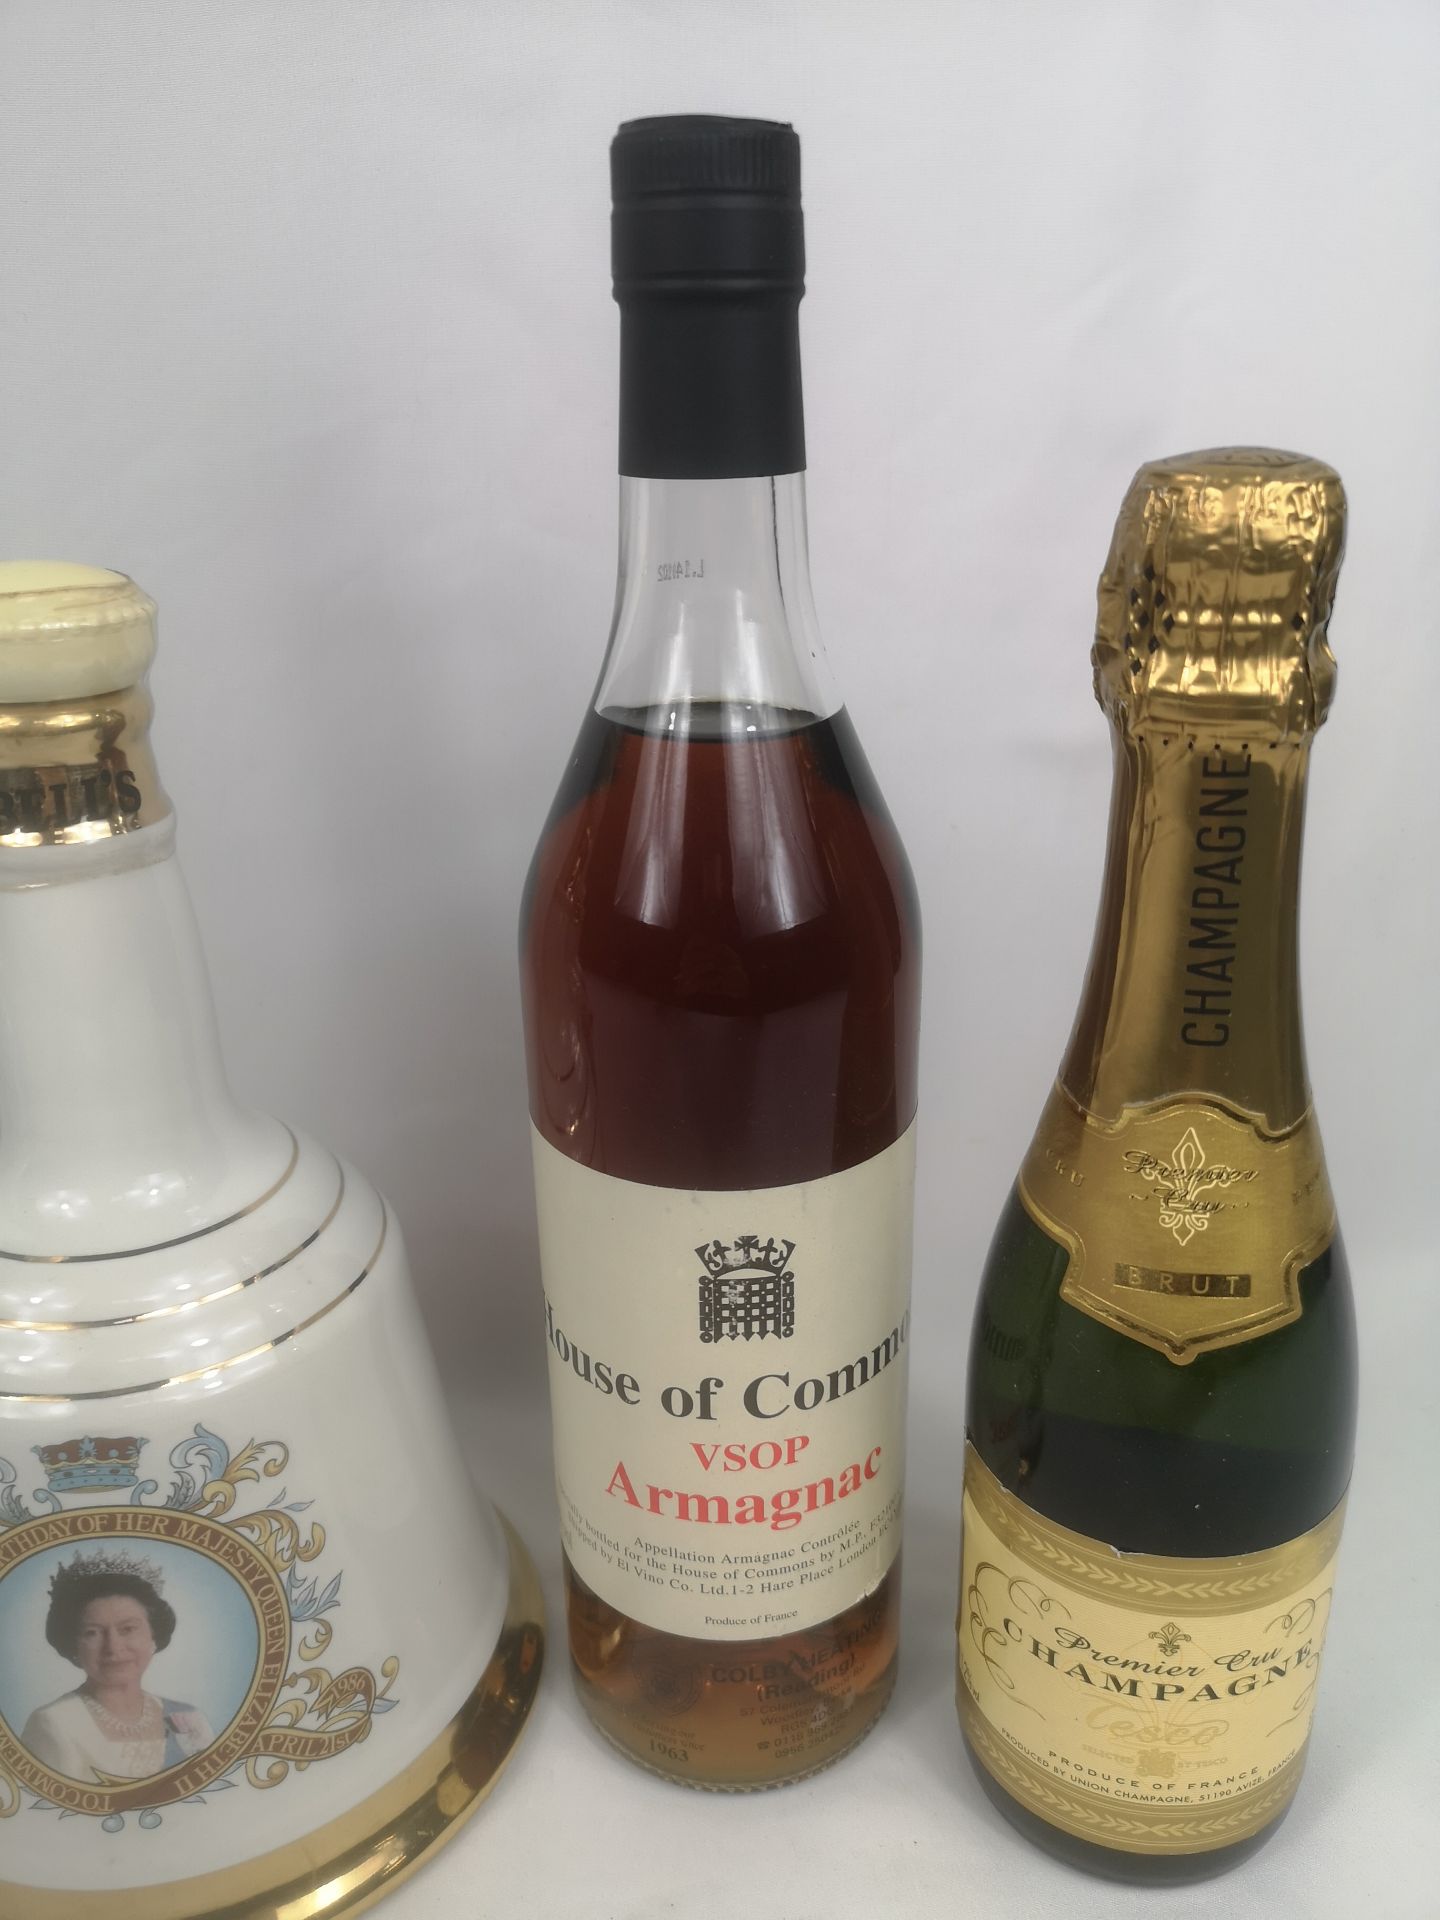 Three Bells porcelain whisky decanters, bottle of House of Commons Armagnac - Image 5 of 6